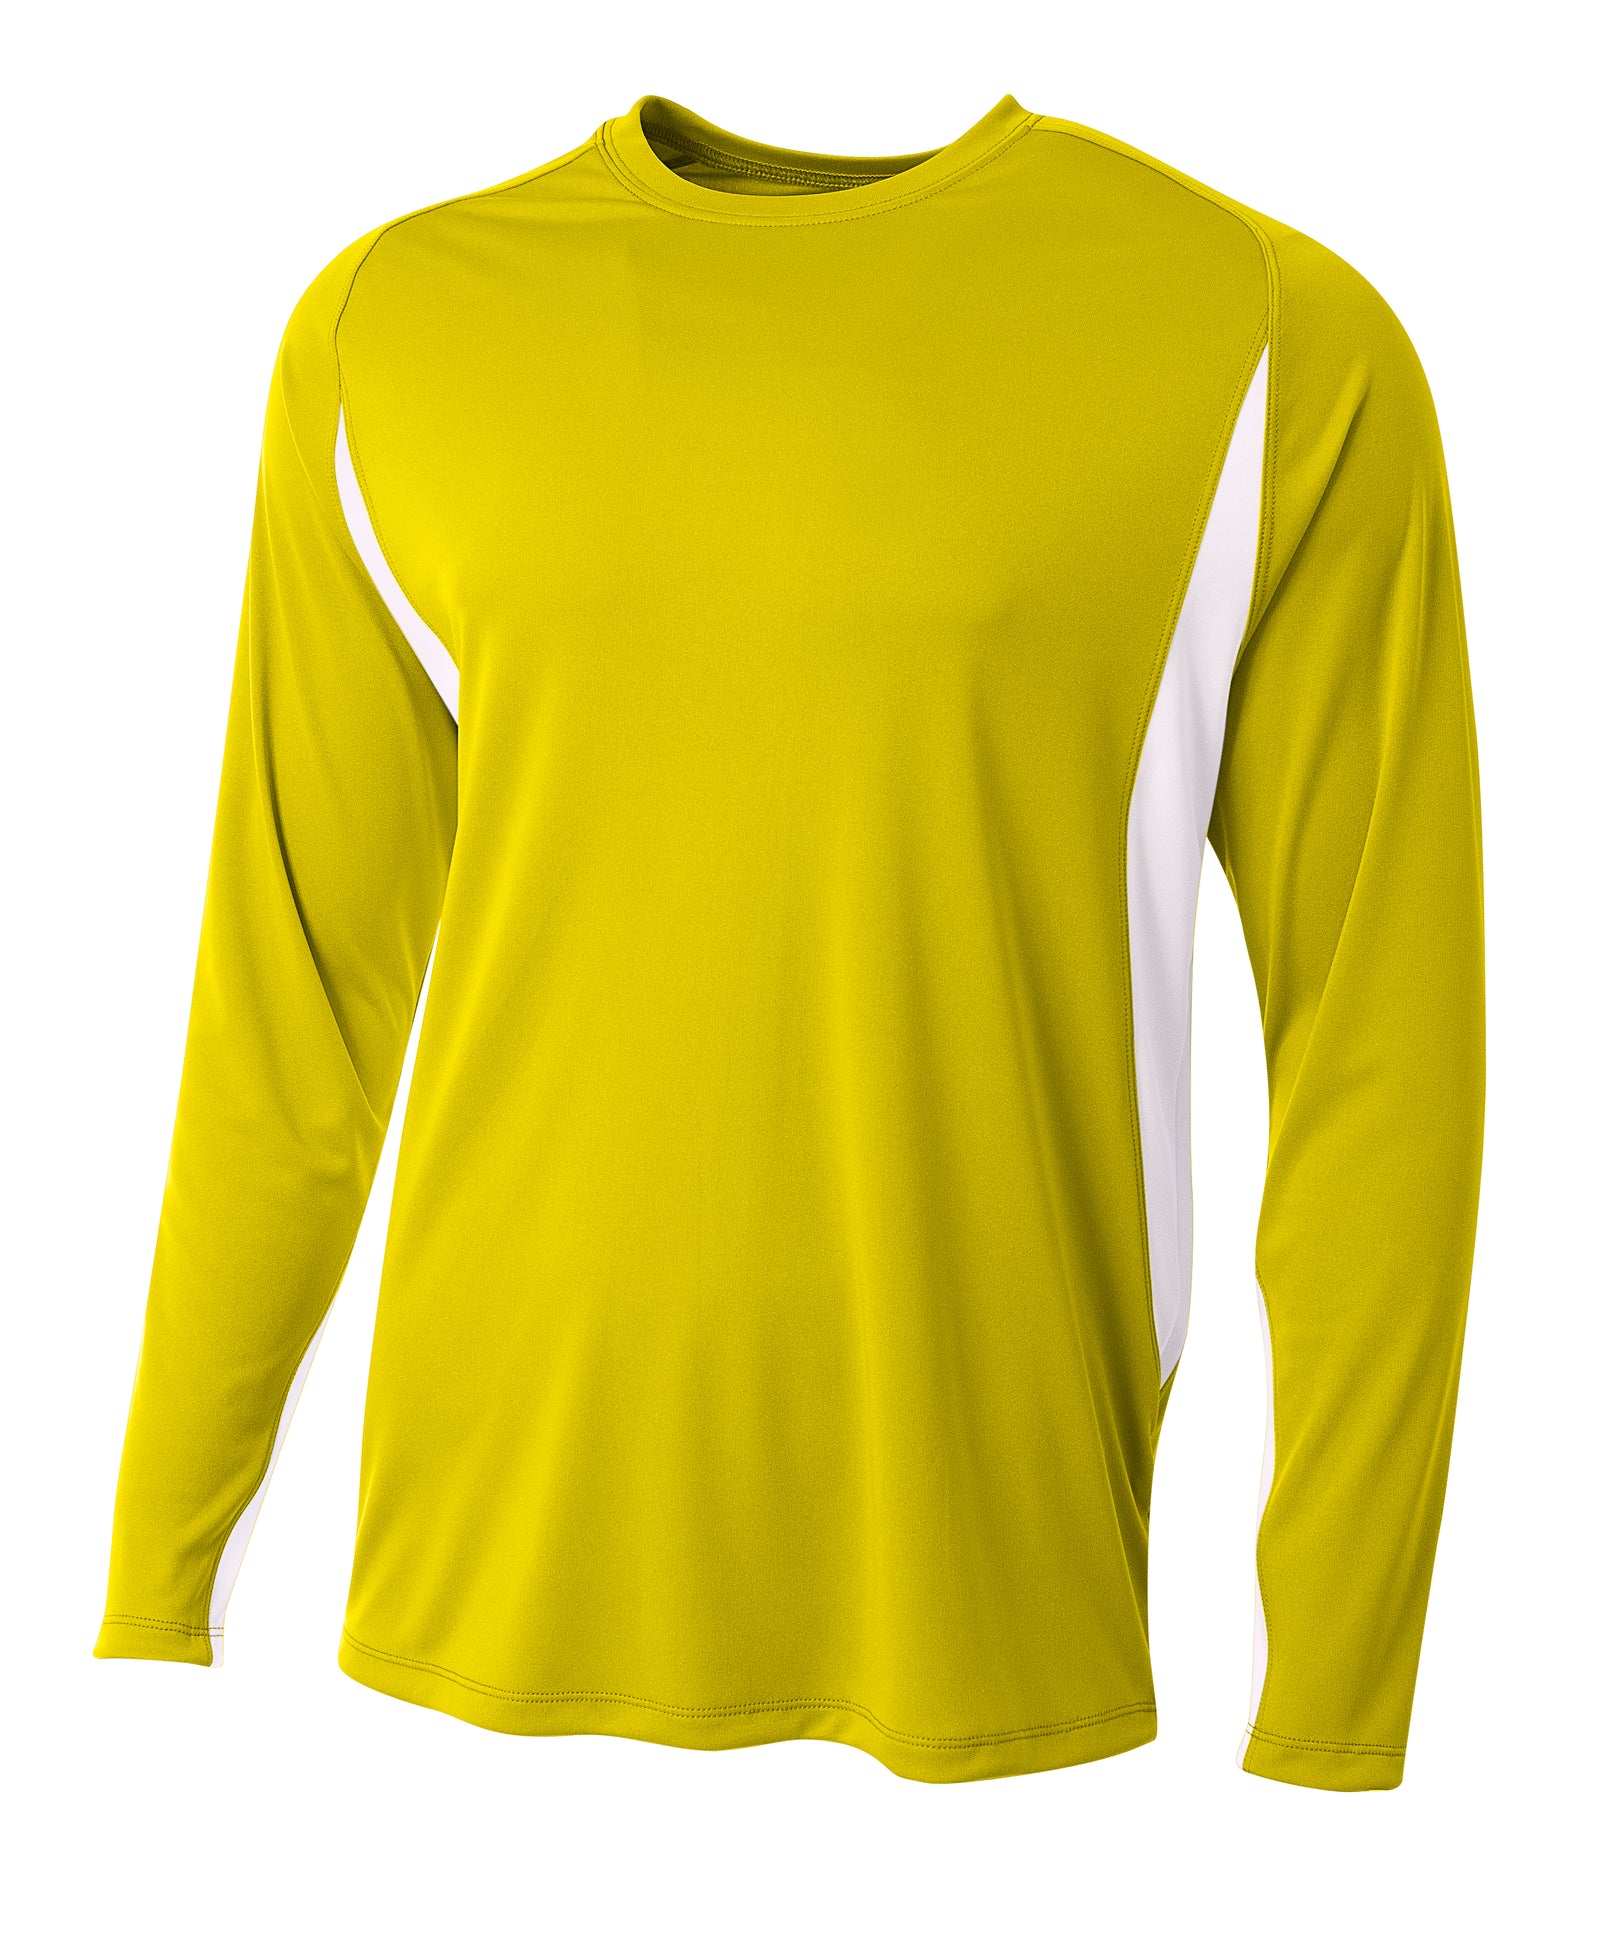 Gold/white A4 A4 Long Sleeve Color Block Tee